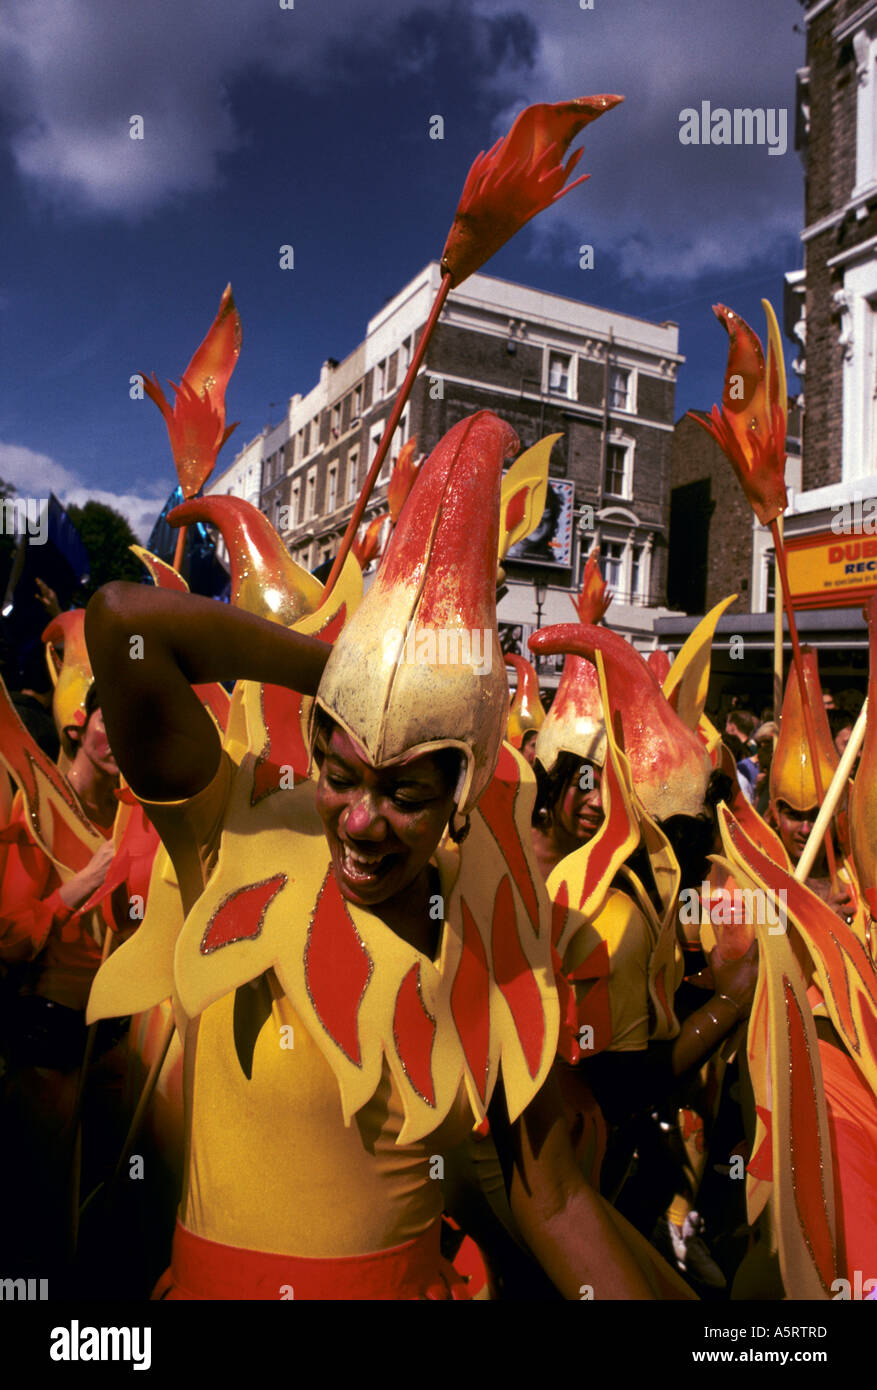 NOTTING HILL CARNIVAL LONDON GIRLS FROM ONE OF THE COMPETING TEAMS DRESSED IN COSTUMES WITH A THEME OF FLAMES FIRE Stock Photo